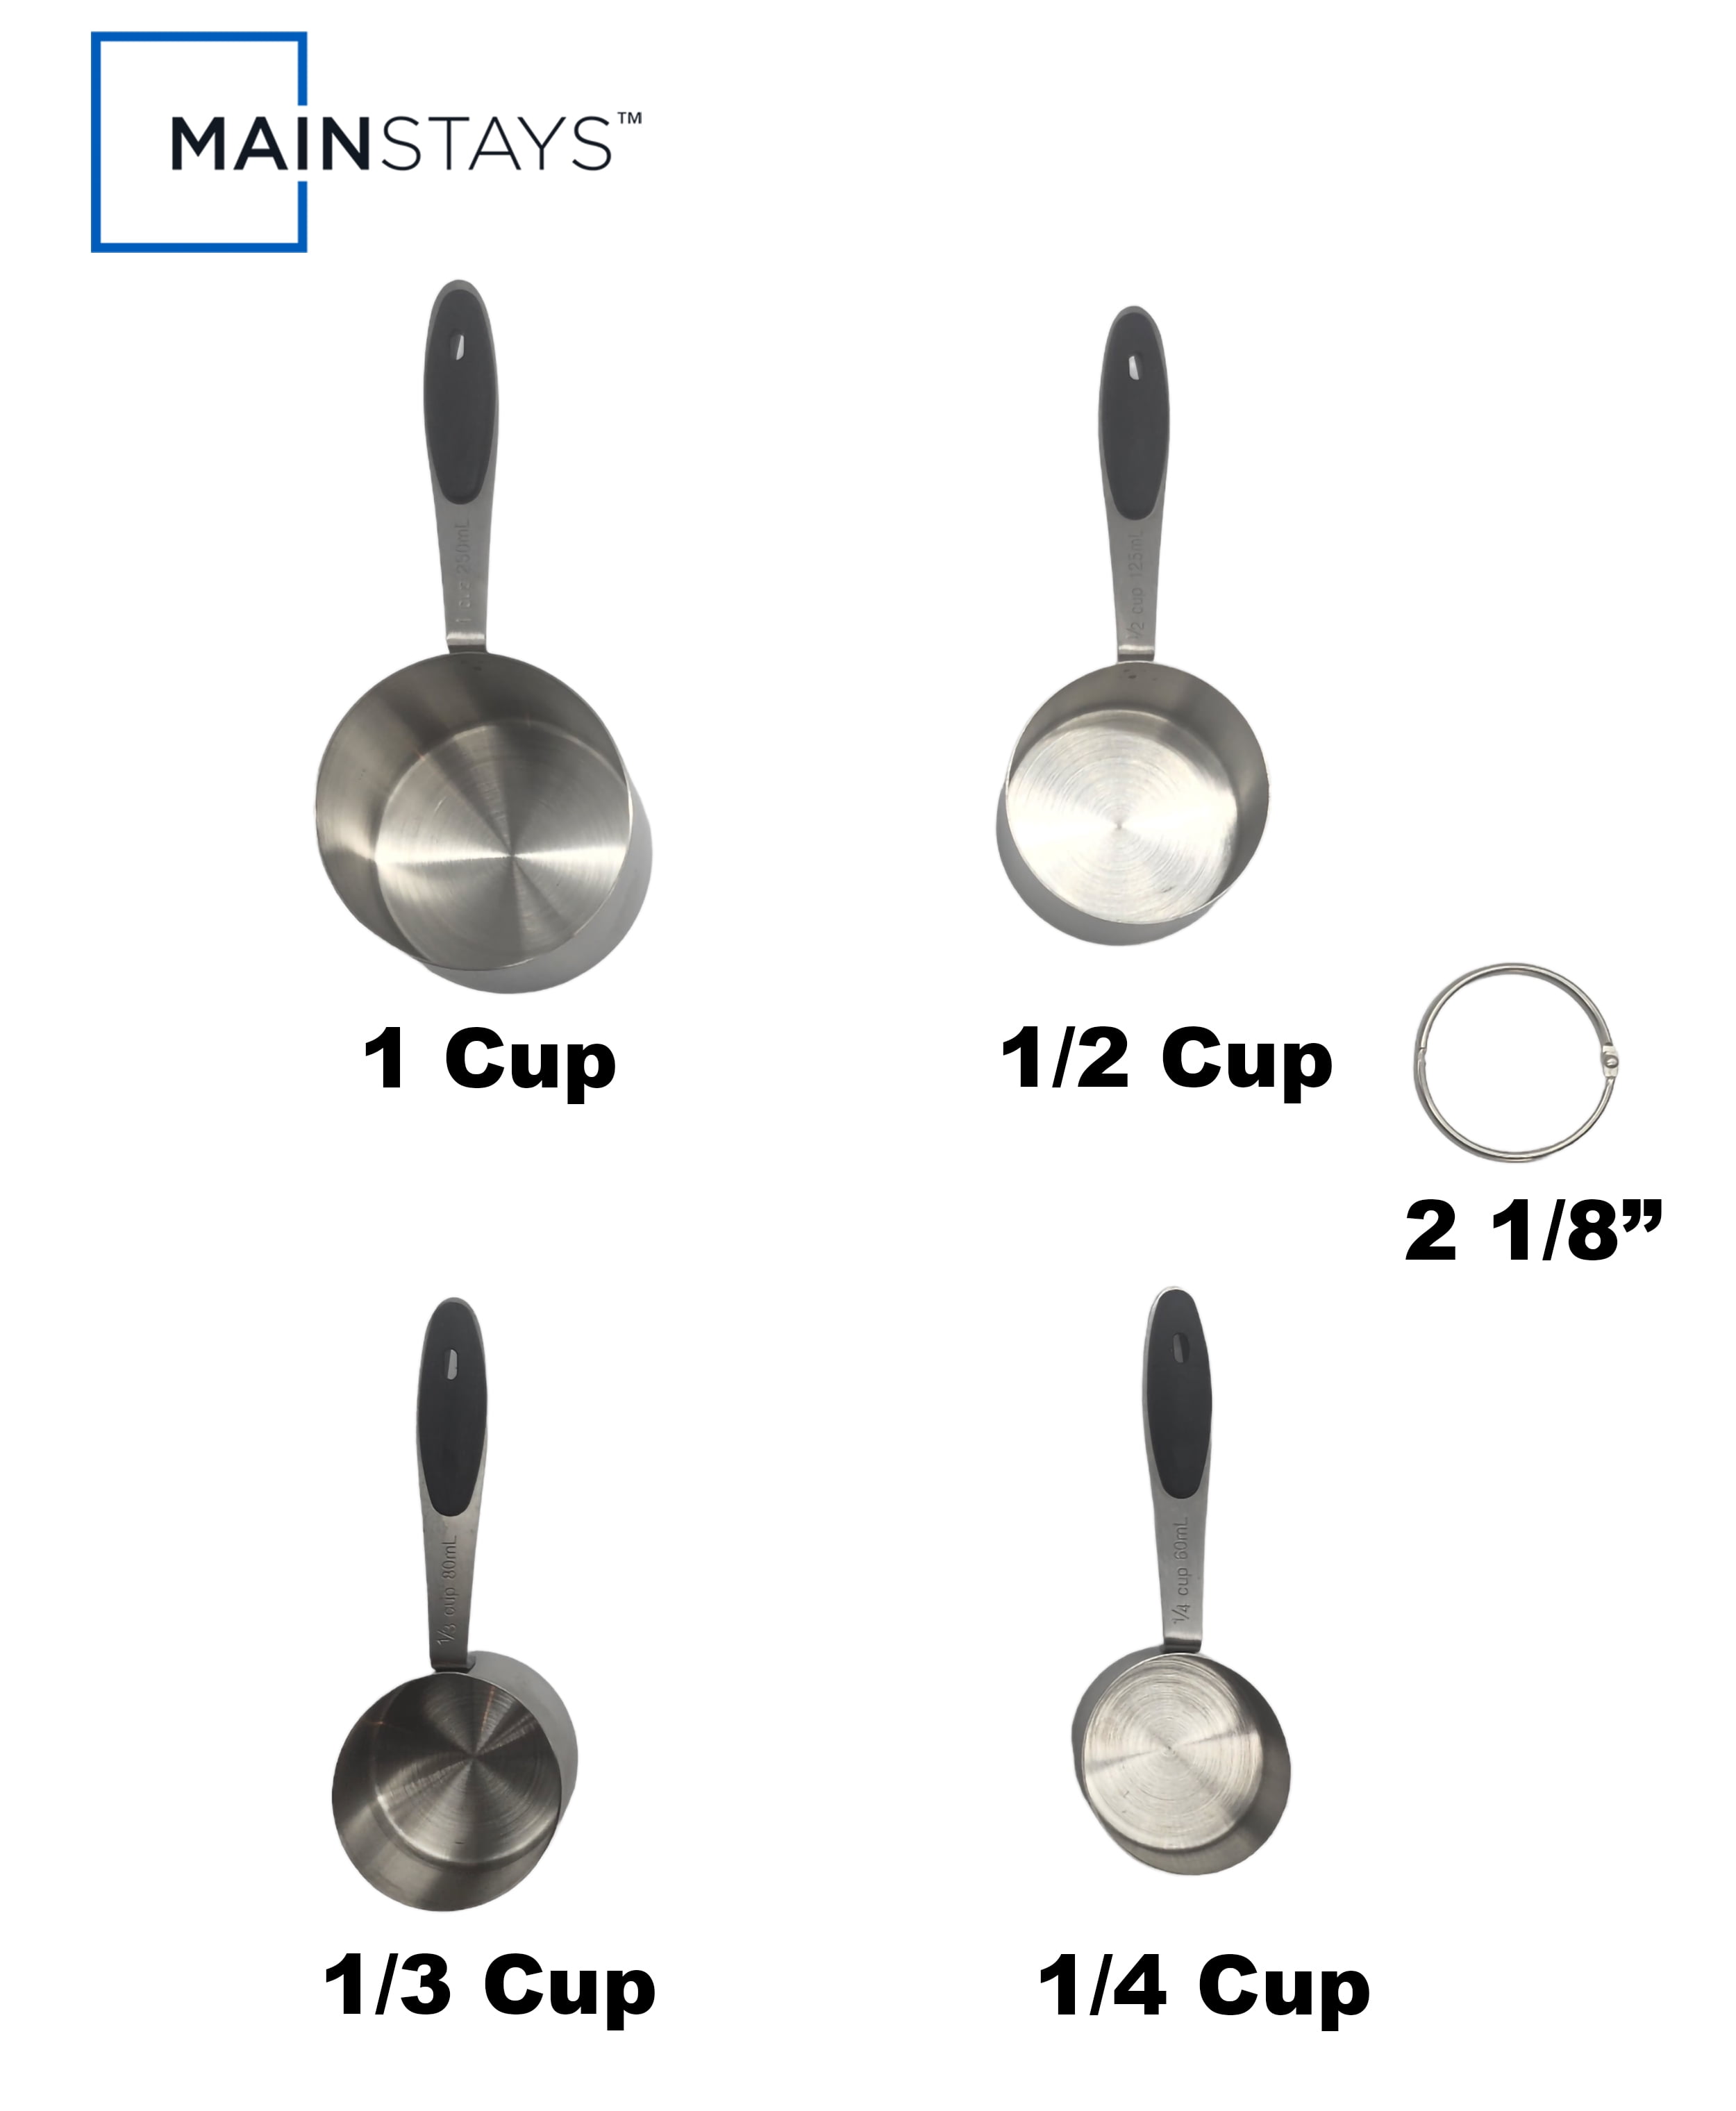 Stainless Steel Dry Measuring Cup Set, 4 Piece - SANE - Sewing and  Housewares